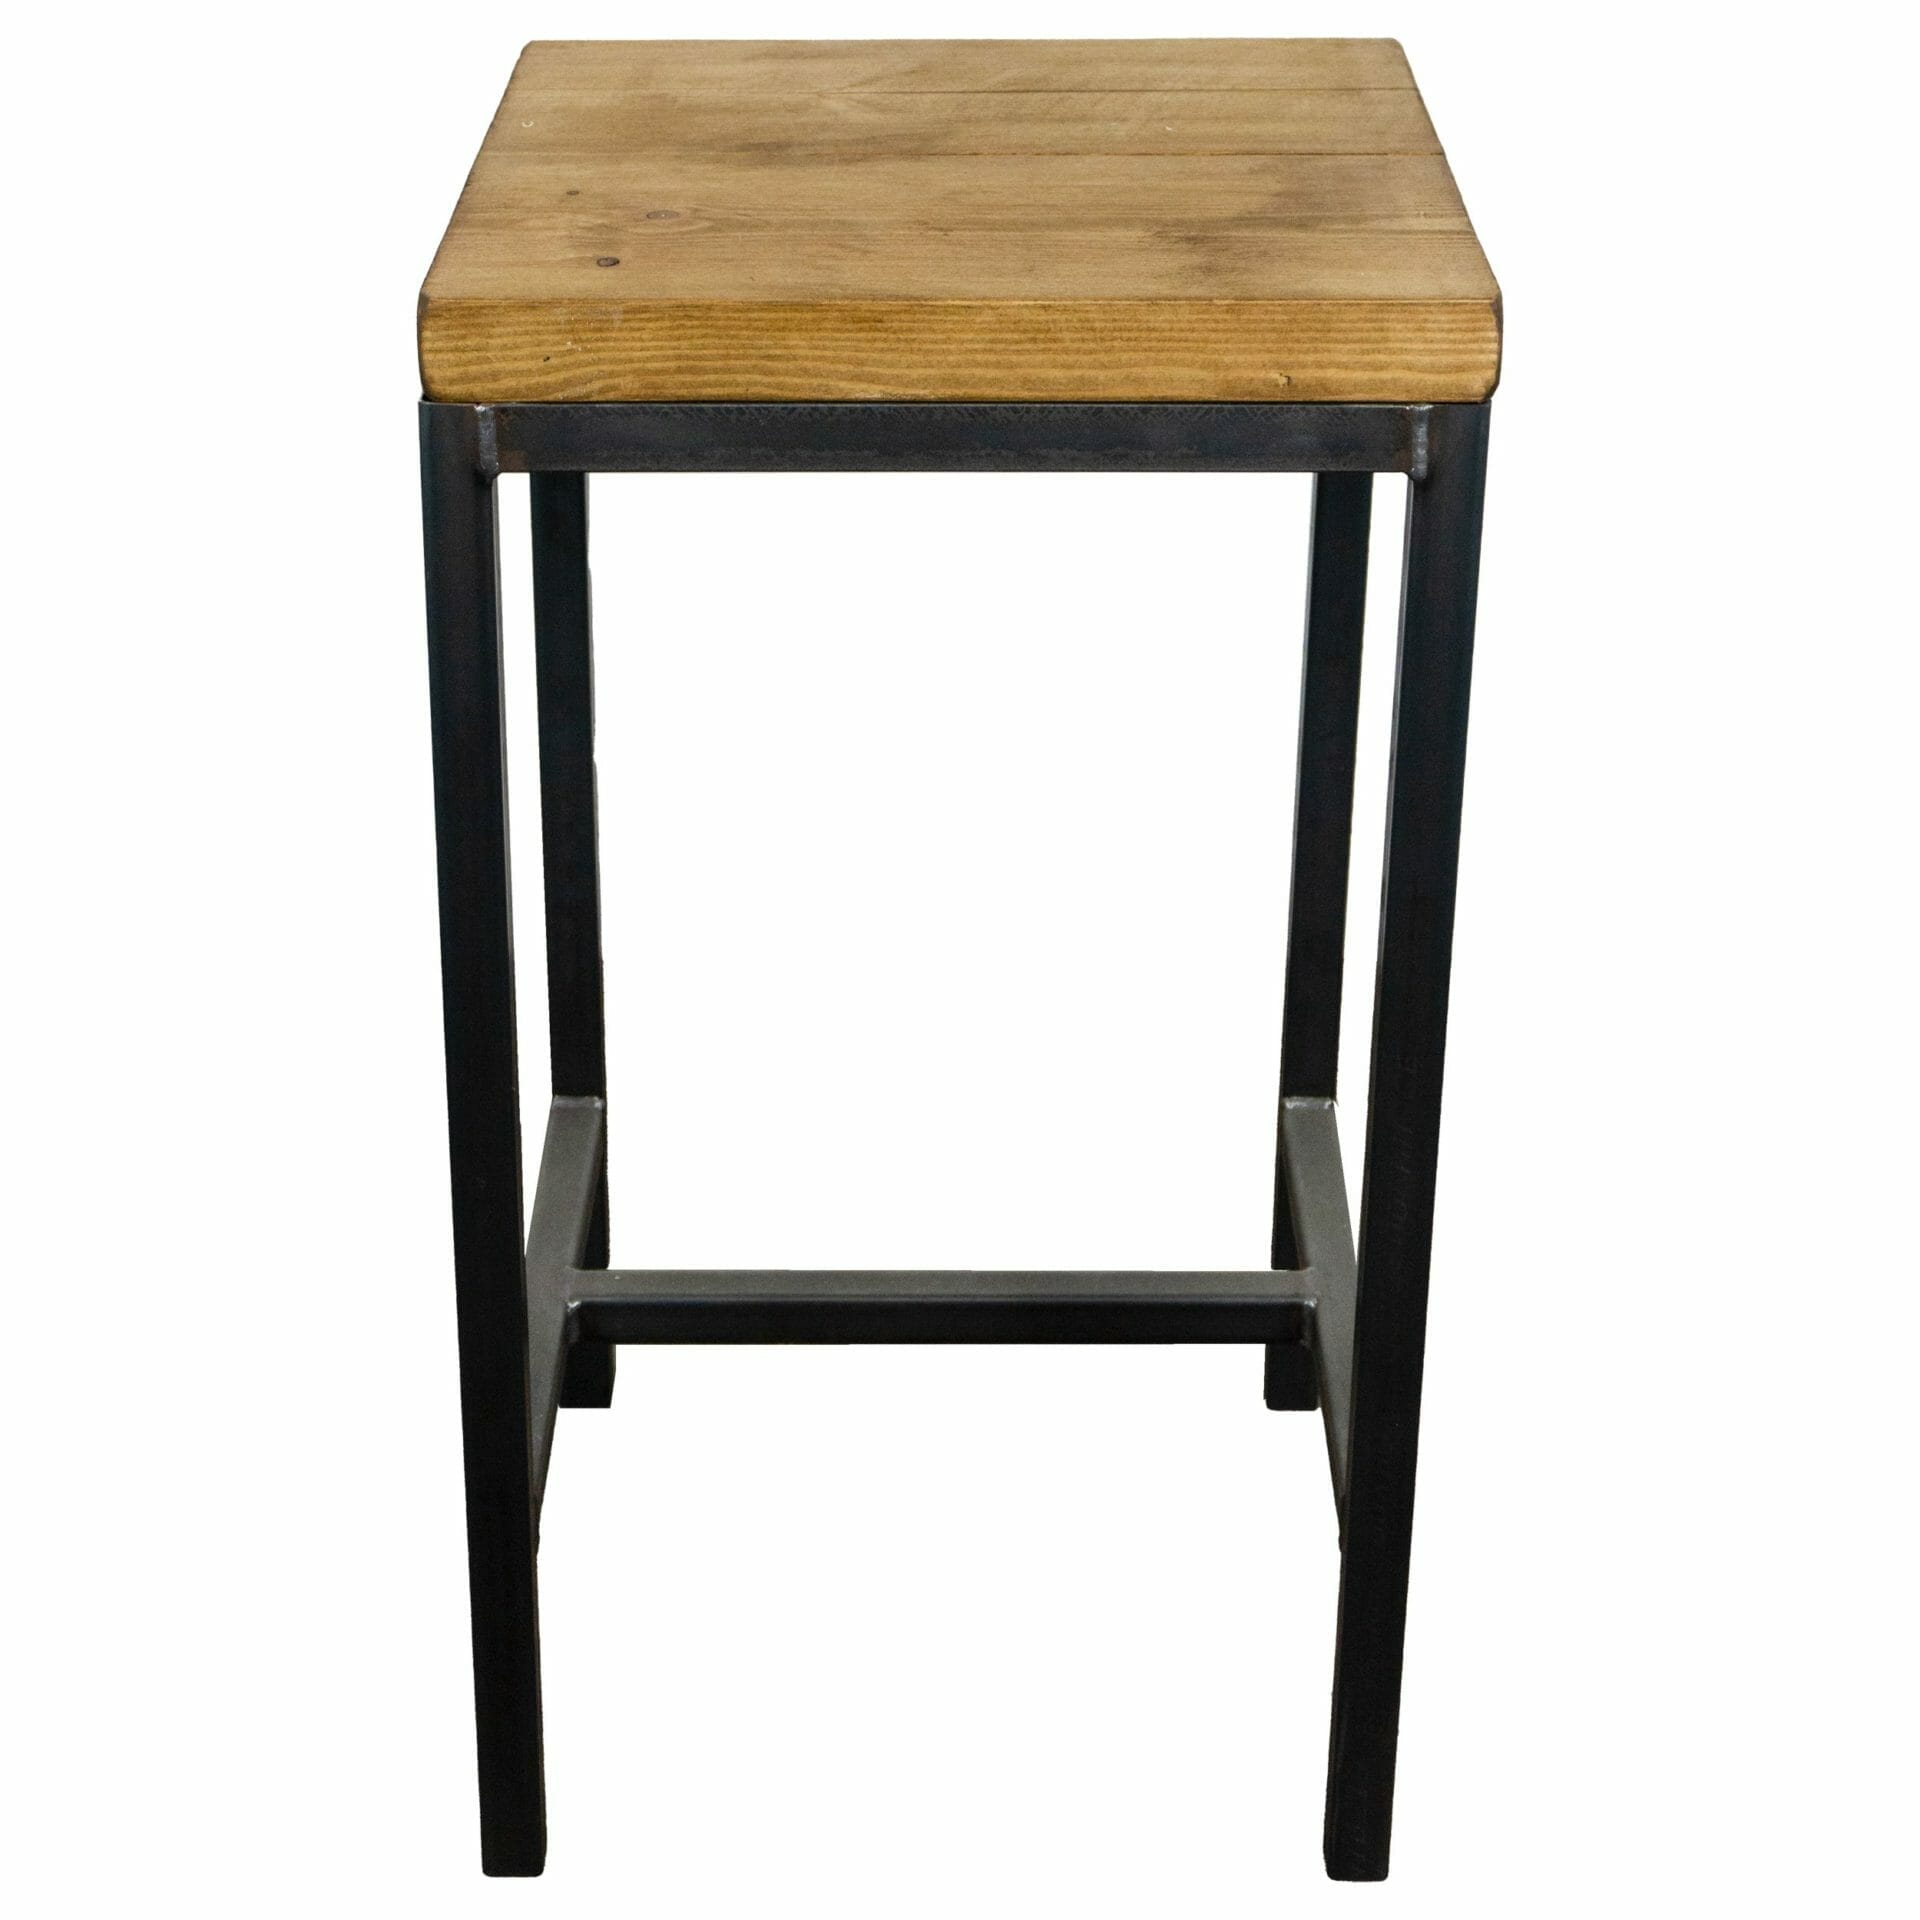 black steel industrial pipe table with reclaimed wooden shelves